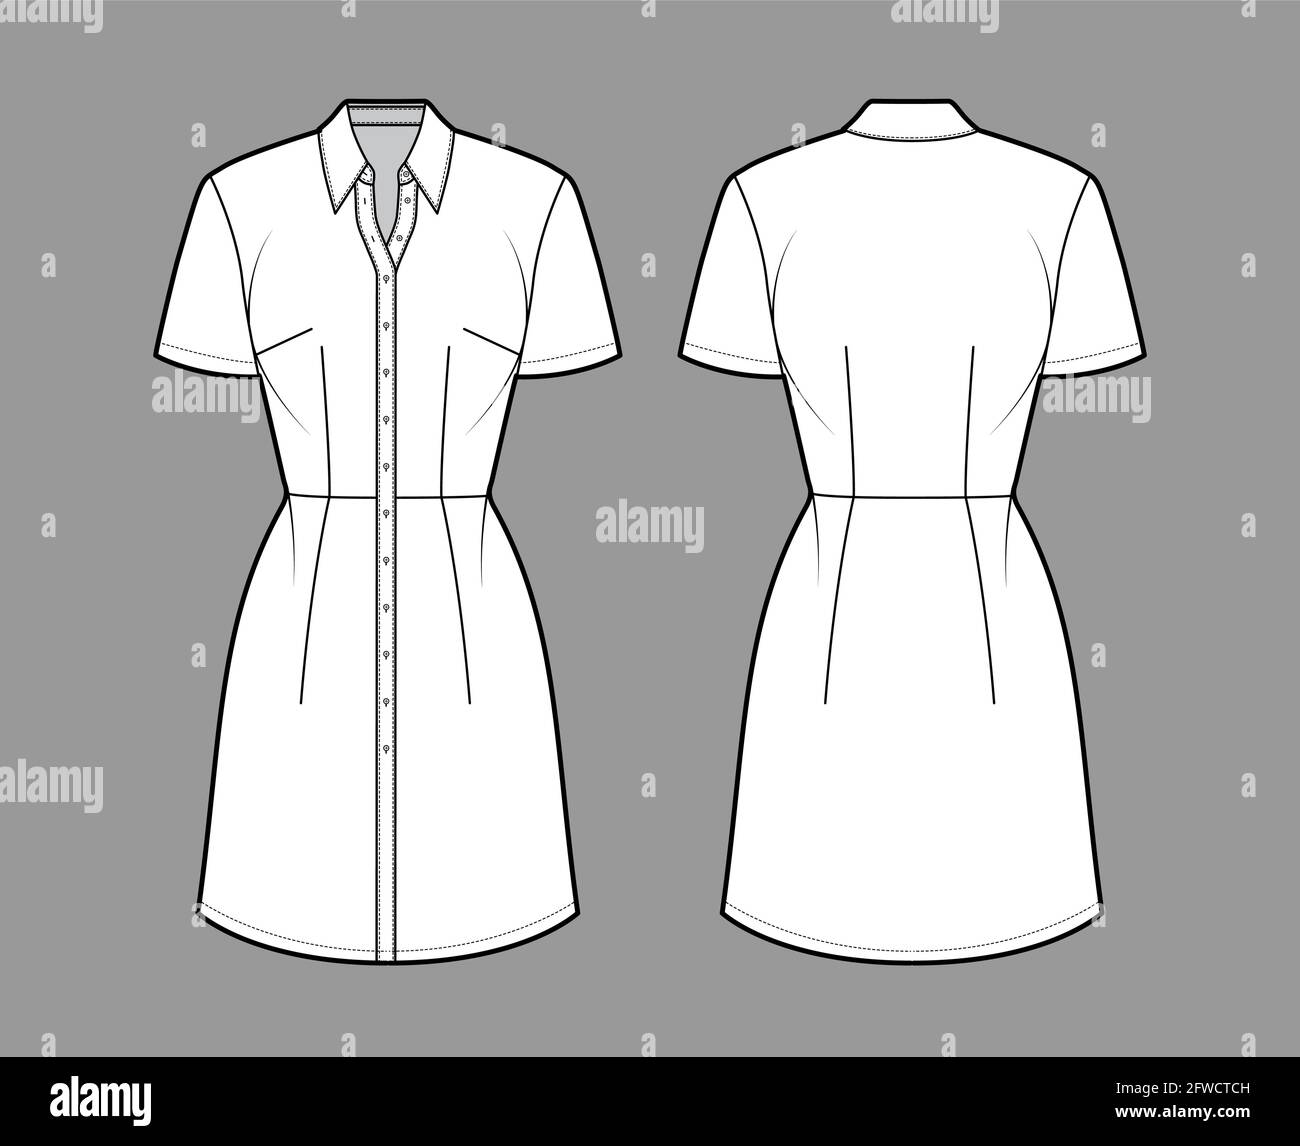 Dress shirt technical fashion illustration with short sleeves, fitted body, knee length pencil skirt, classic collar, button closure. Flat apparel front, back, white color. Women men unisex CAD mockup Stock Vector